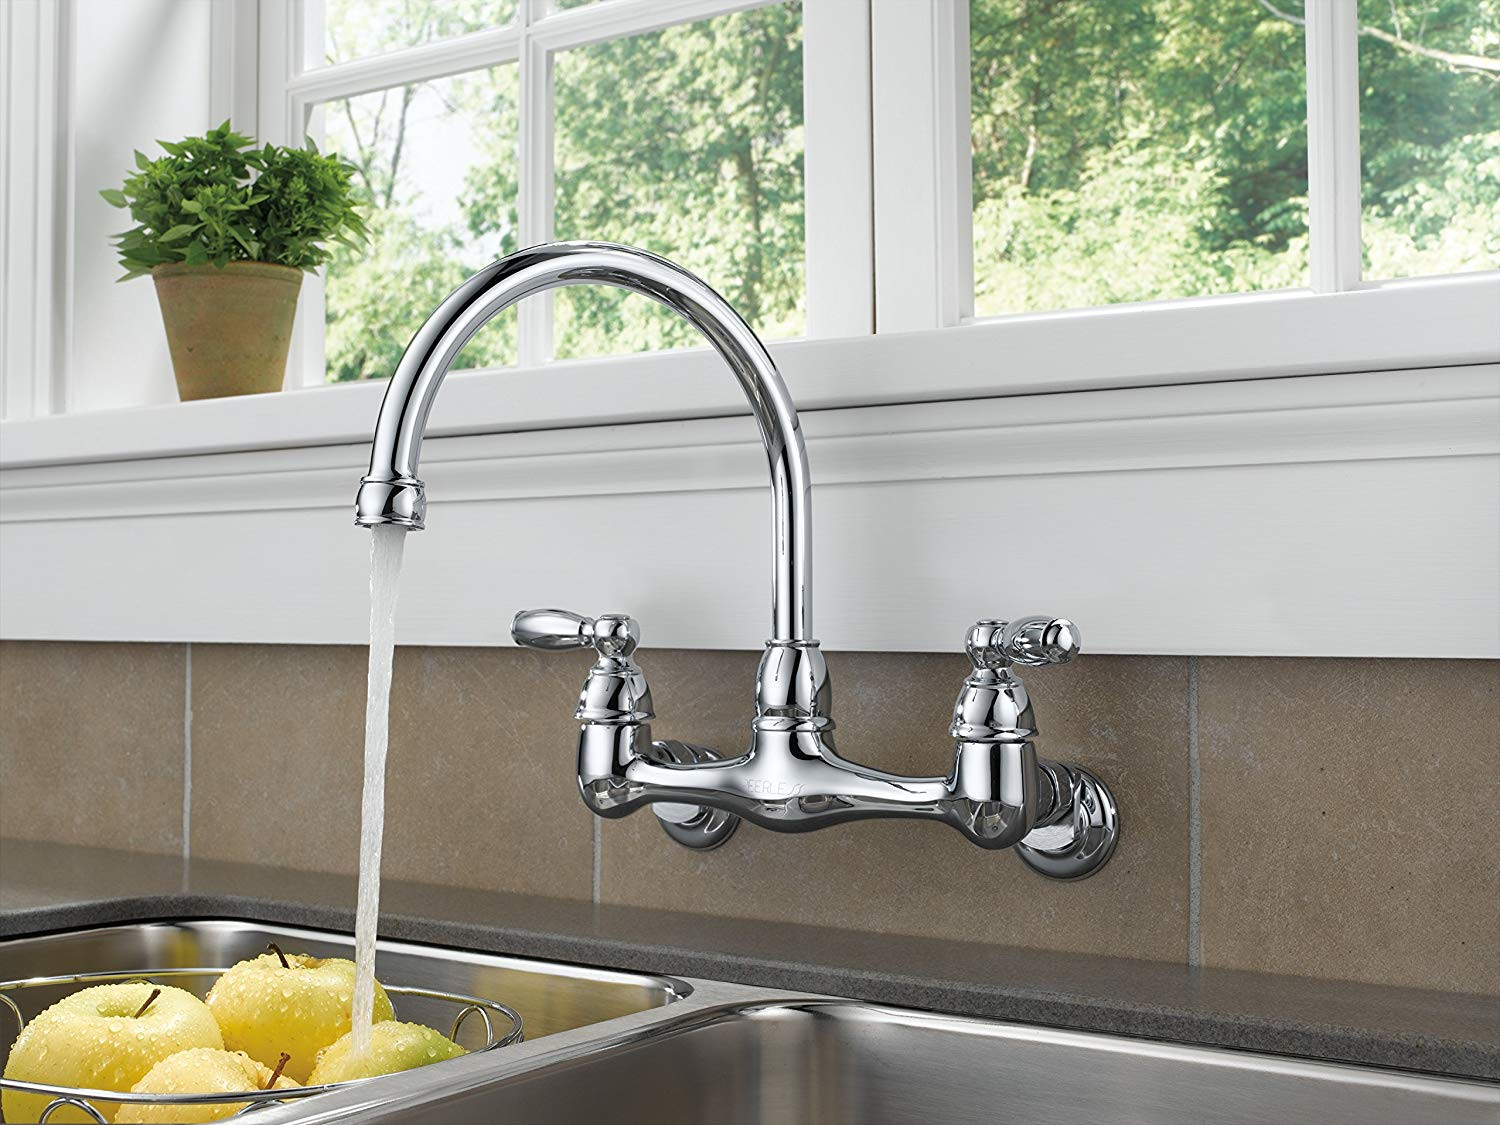 Kitchen Wall Mounted Faucets
 Top 10 Best Wall Mount Kitchen Faucets in 2020 Reviews